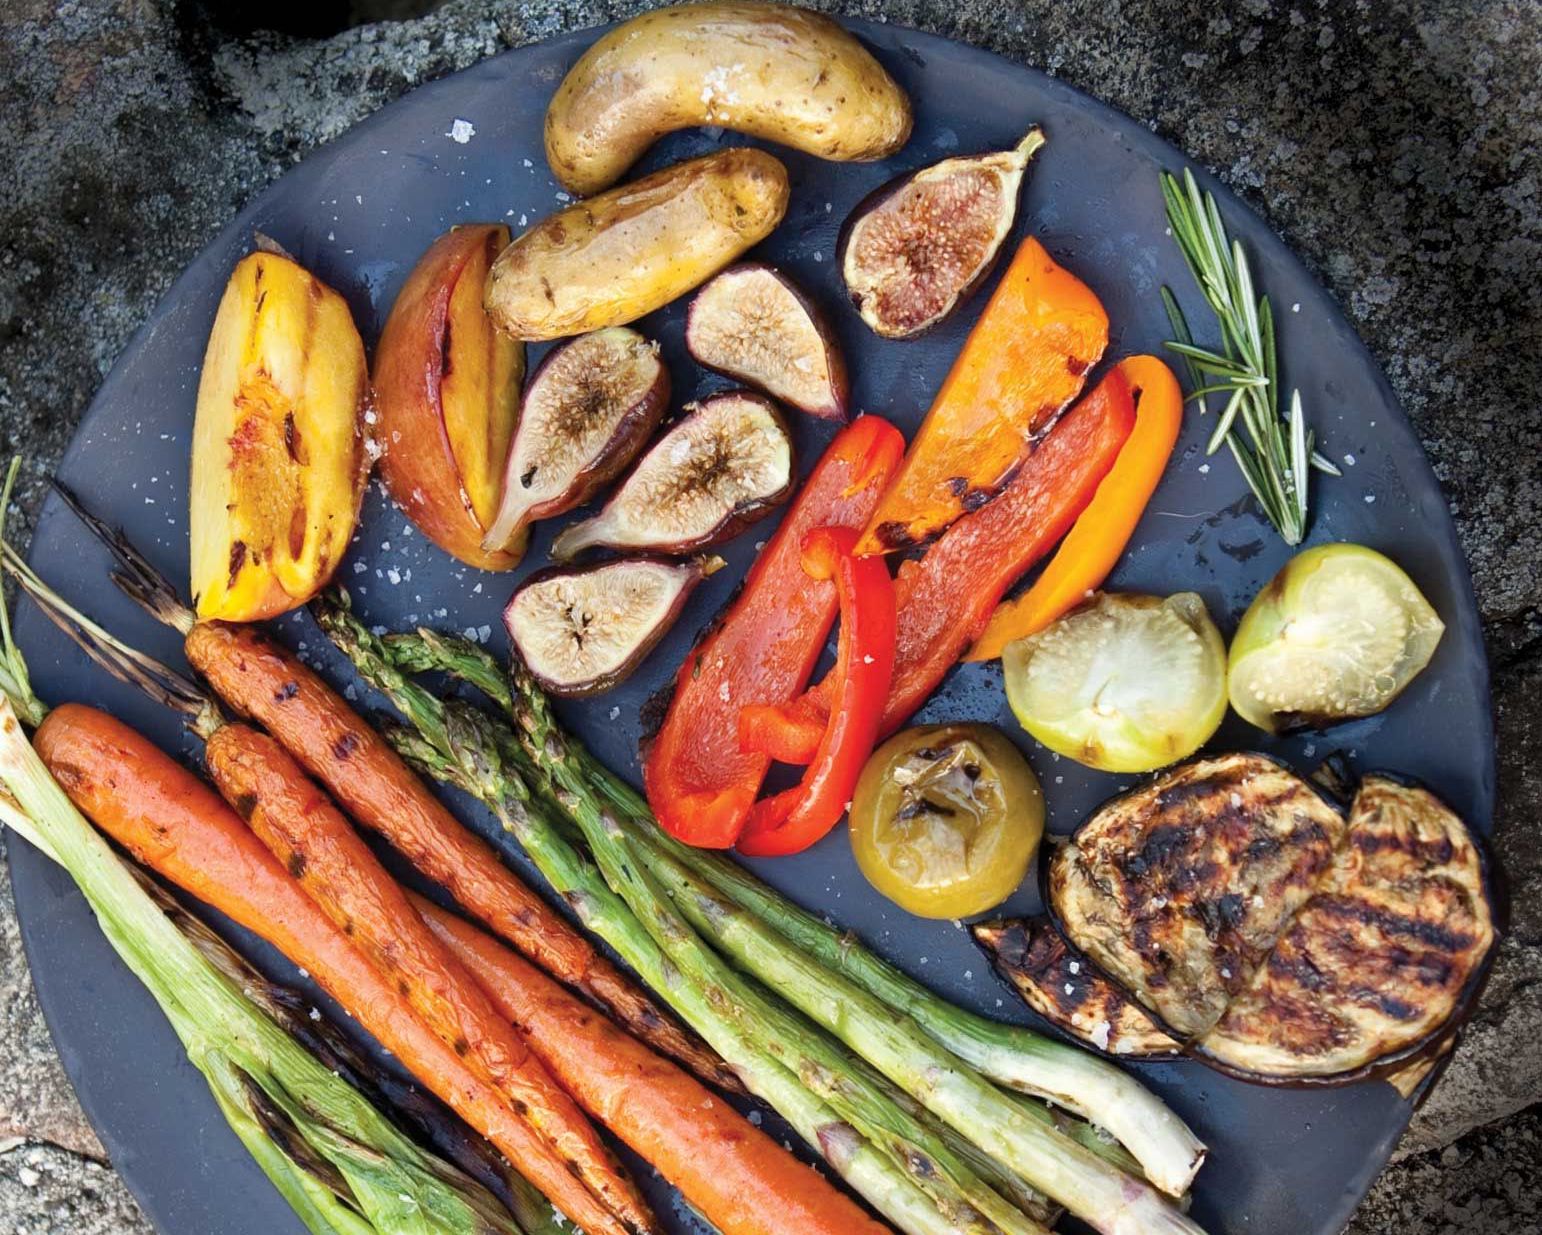 What Job Would You Have in a Restaurant Kitchen? Quiz grilled veggies